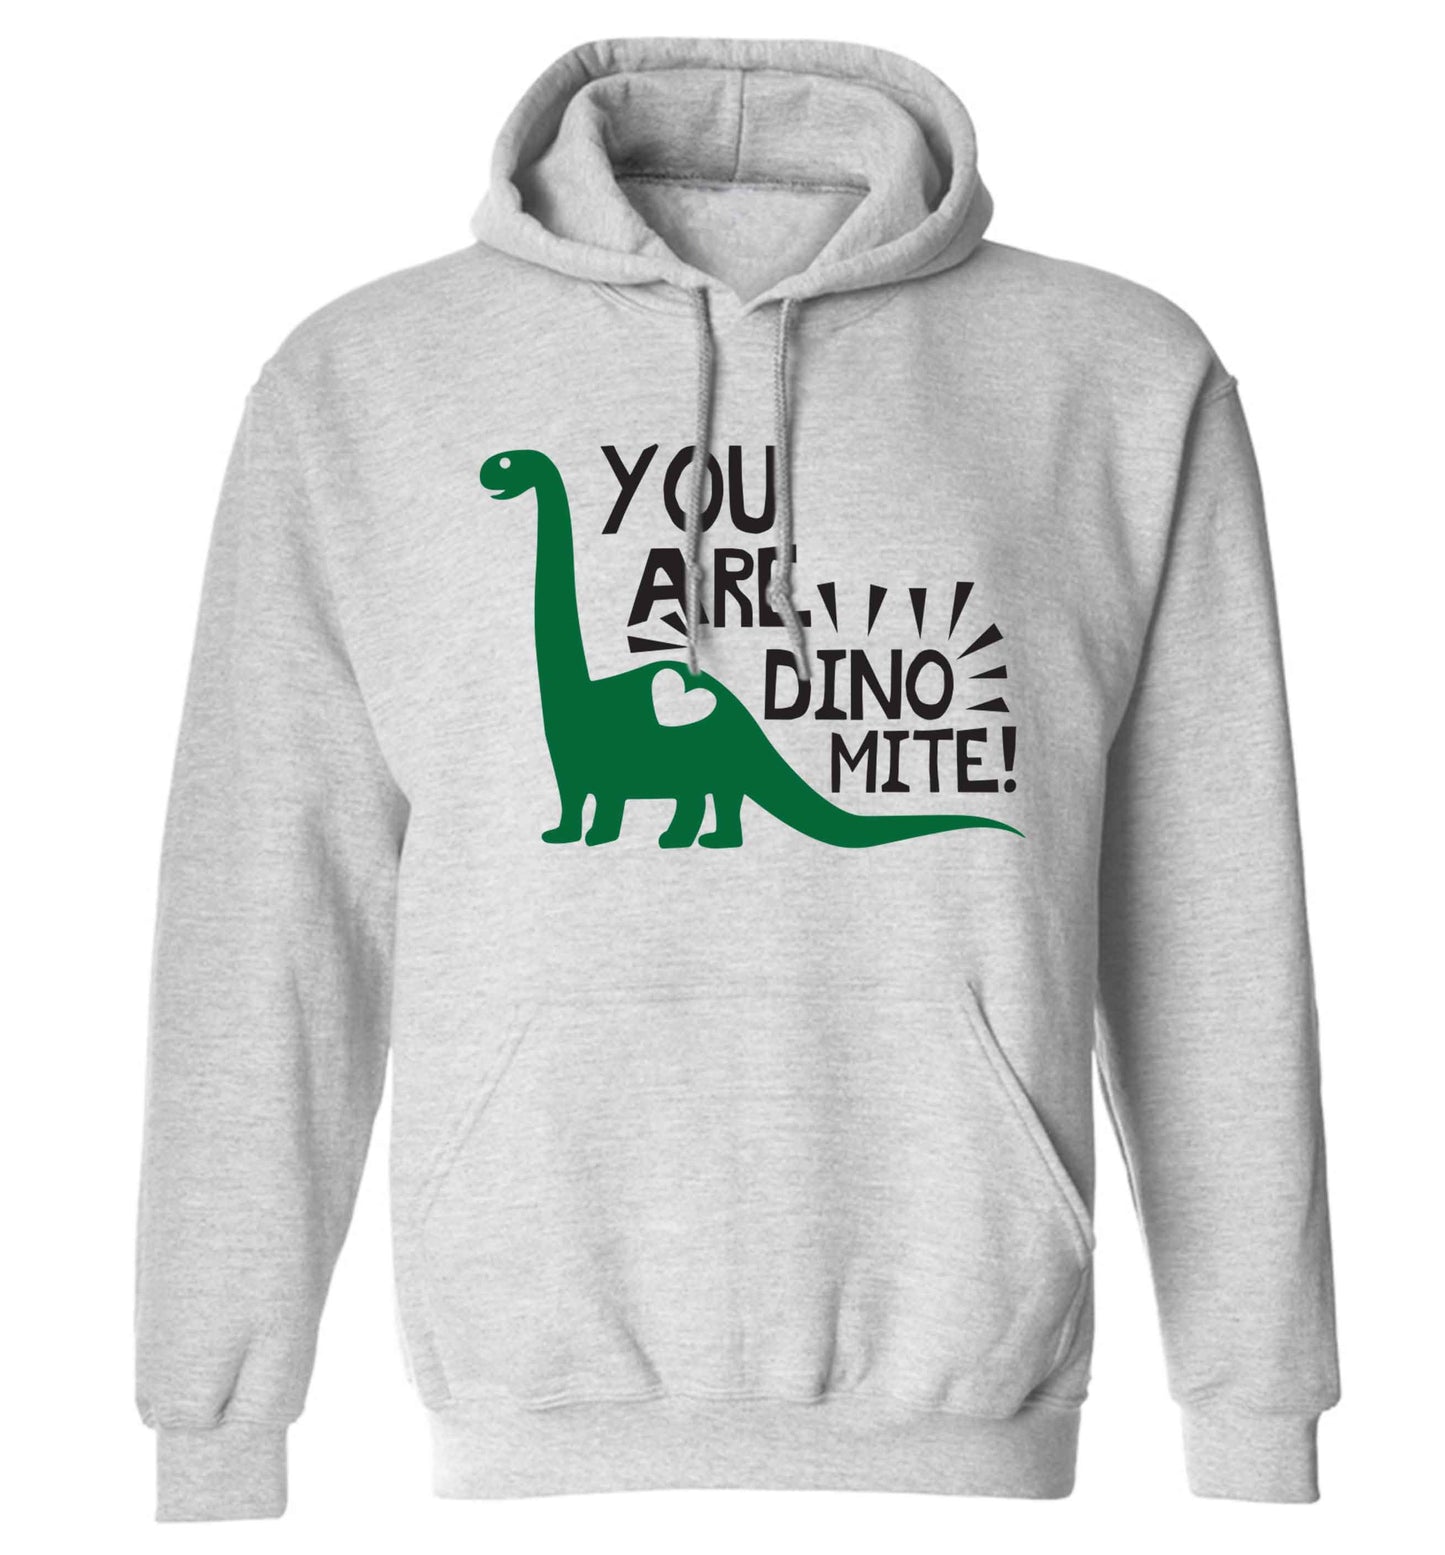 You are dinomite! adults unisex grey hoodie 2XL